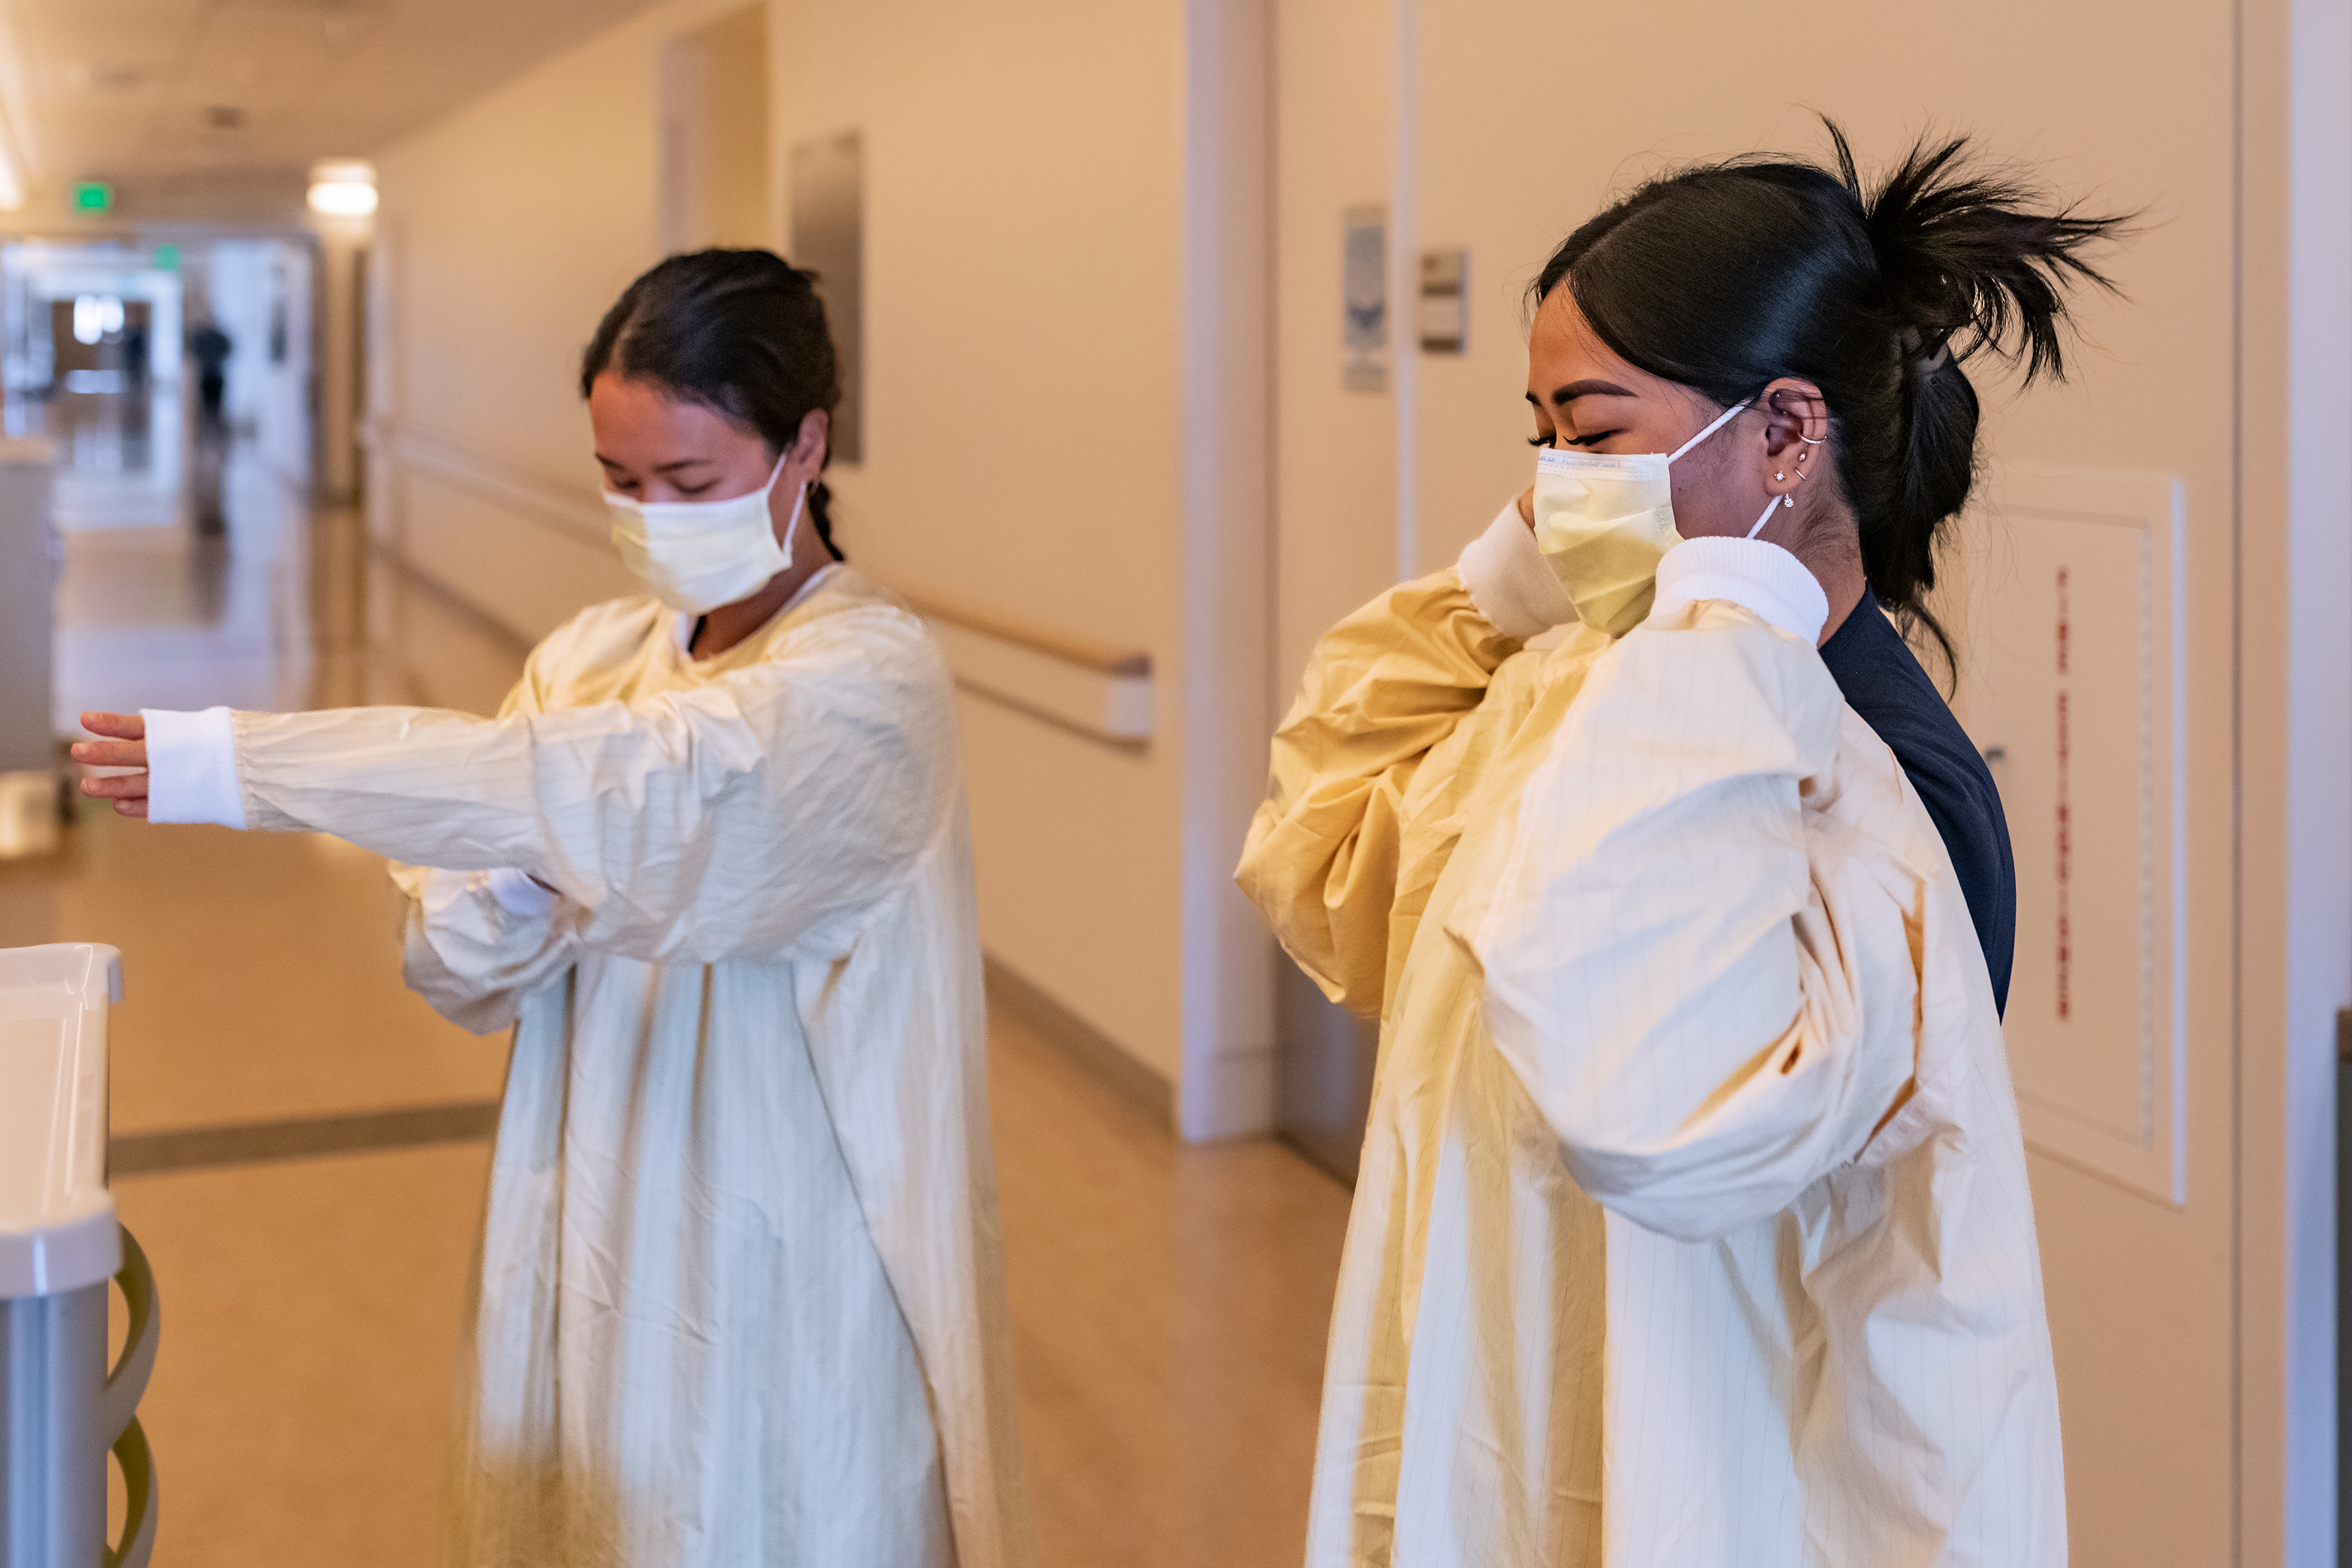 A photo shows two nurses putting on reusable isolation gowns inside of a medical center.